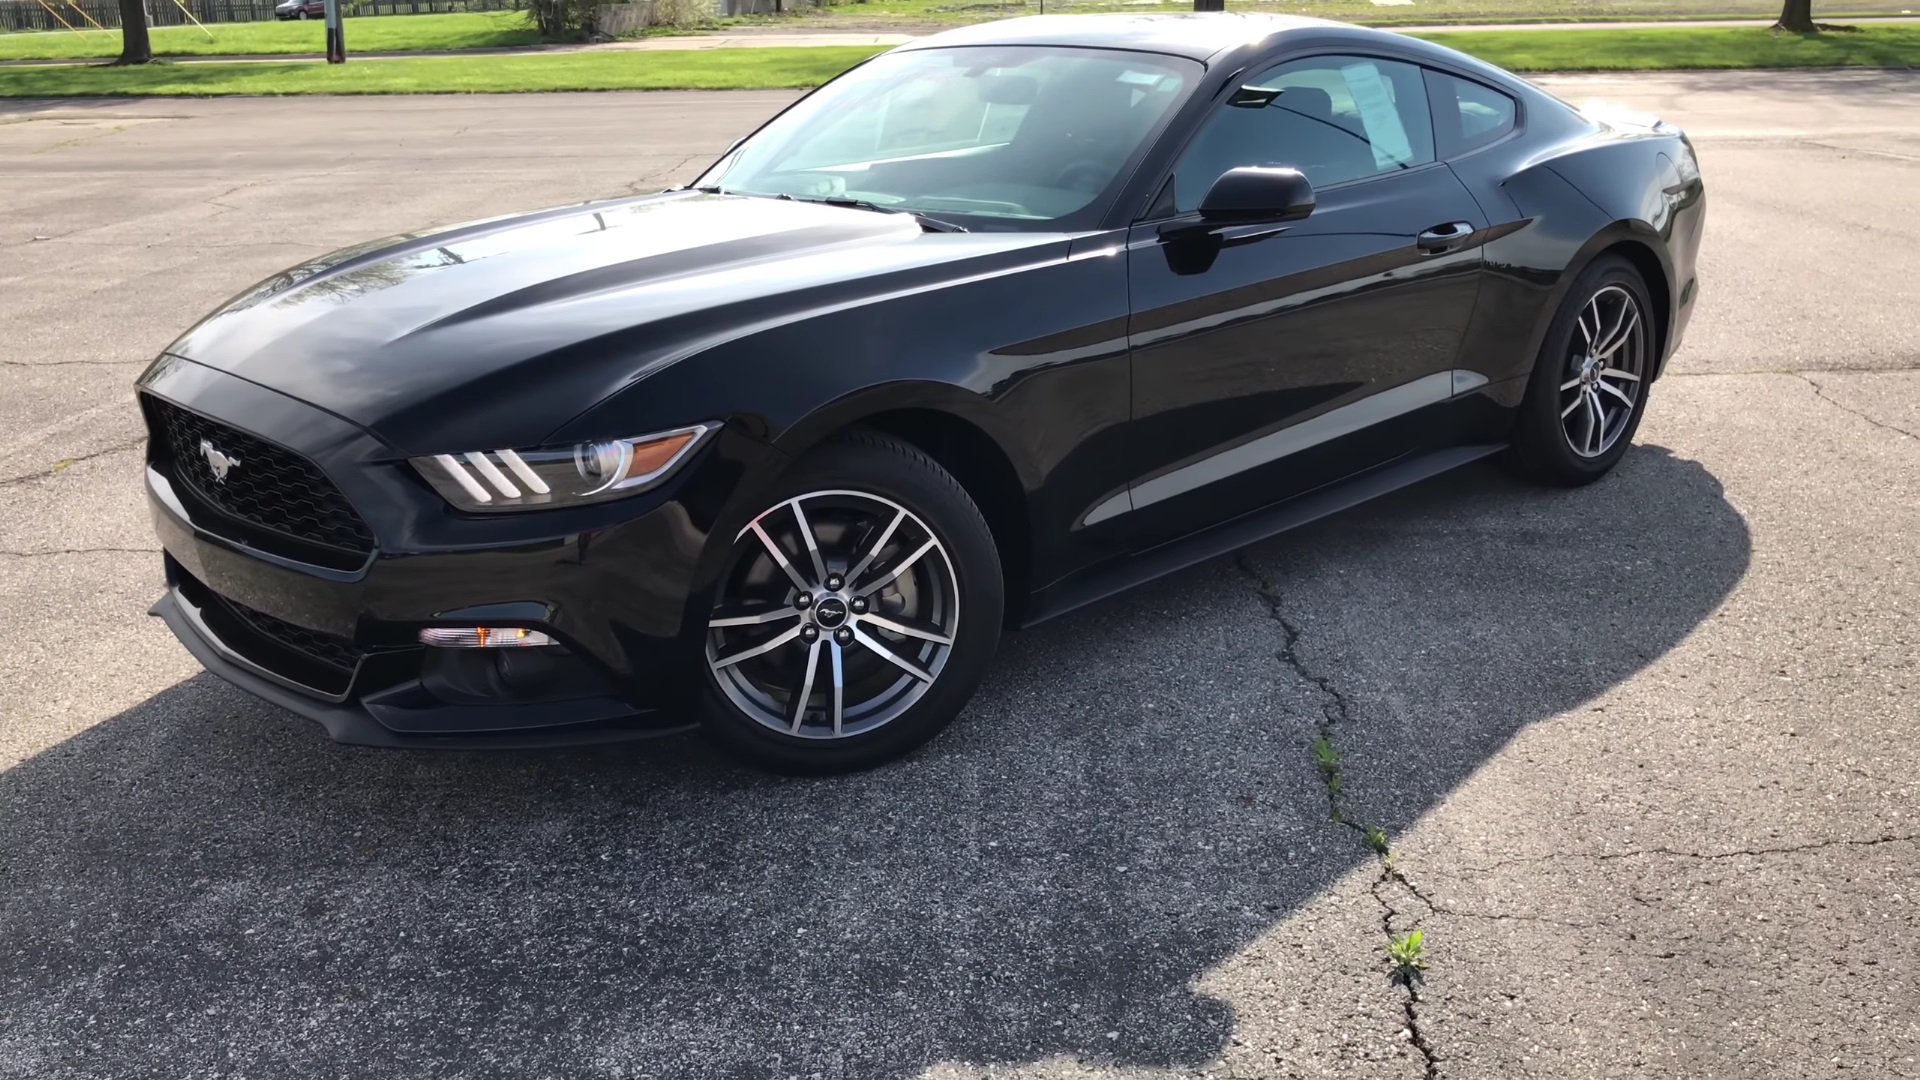 Video: 2017 Ford Mustang EcoBoost - Tour & Test Drive